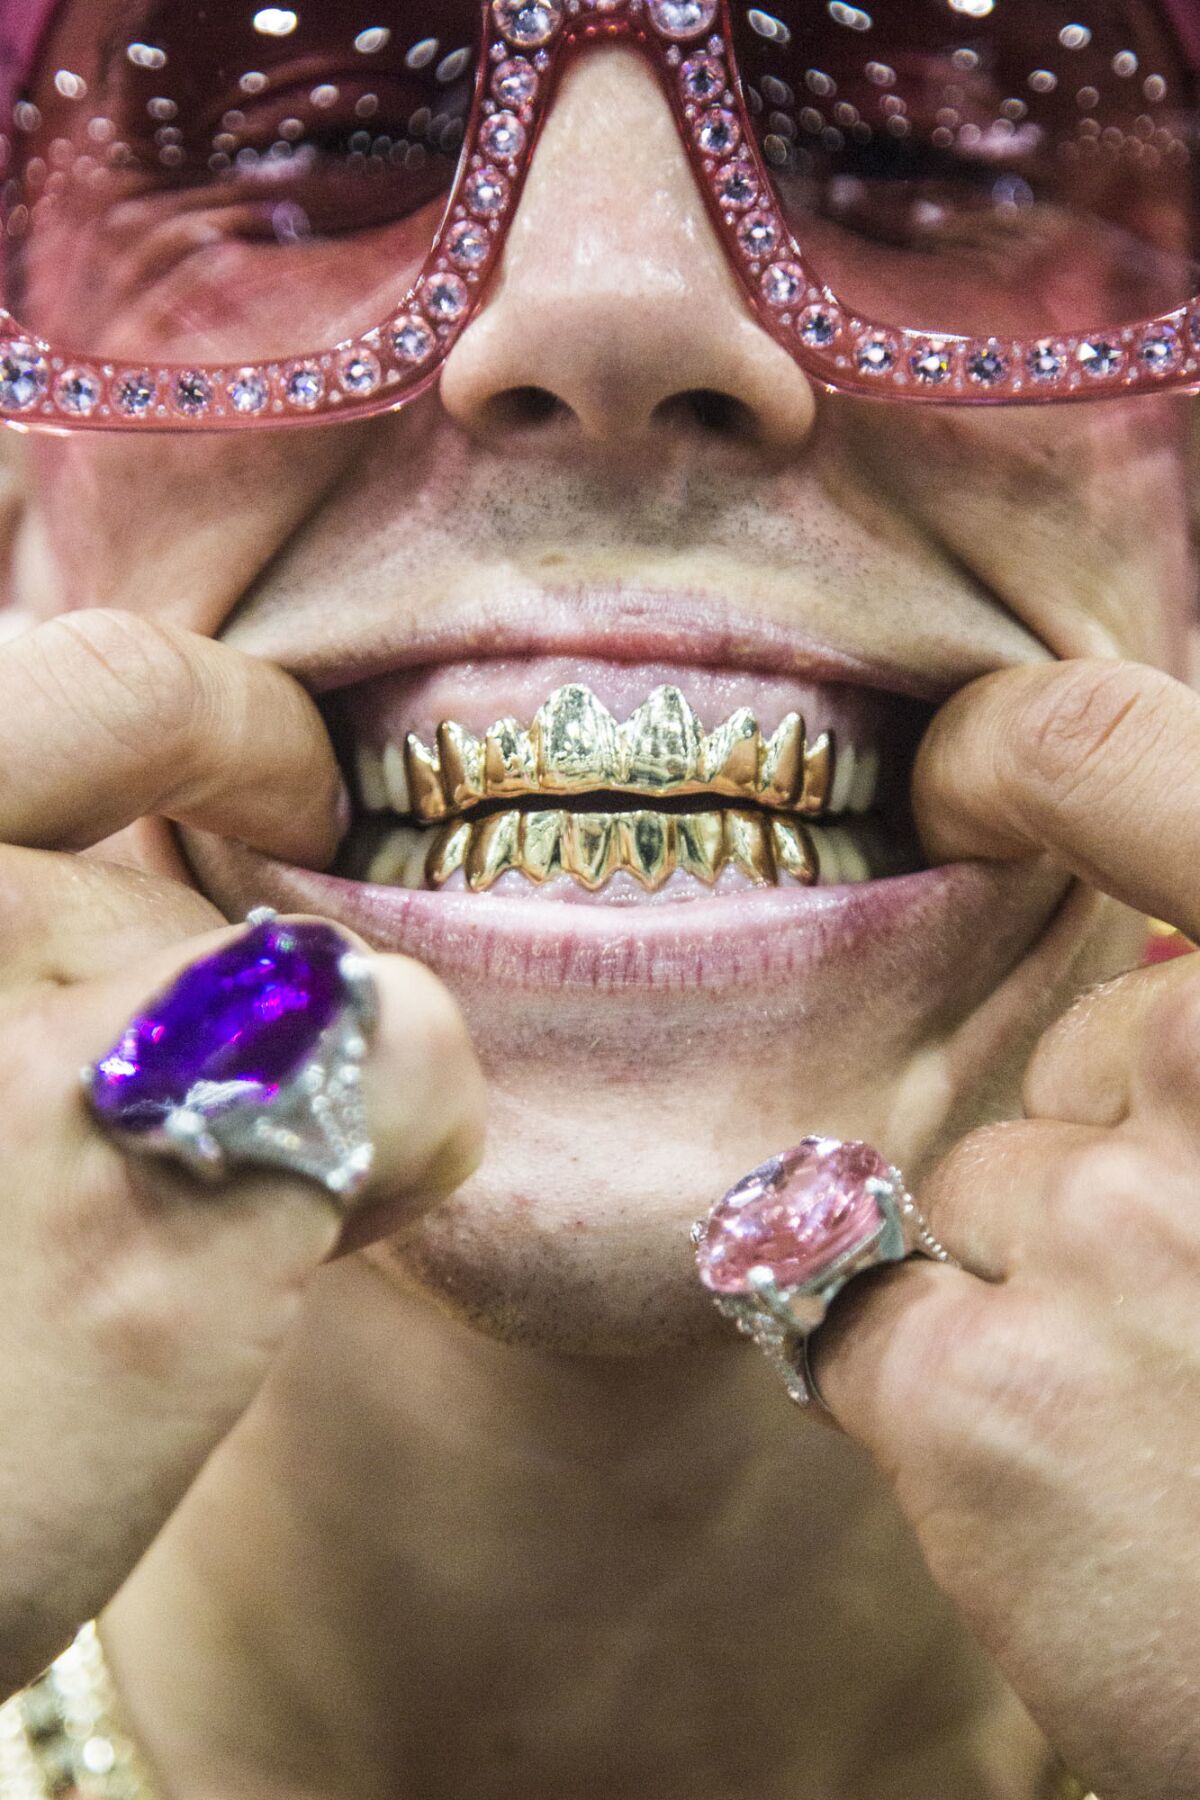 Candy Ken shows off his grills during RuPaul's DragCon LA.